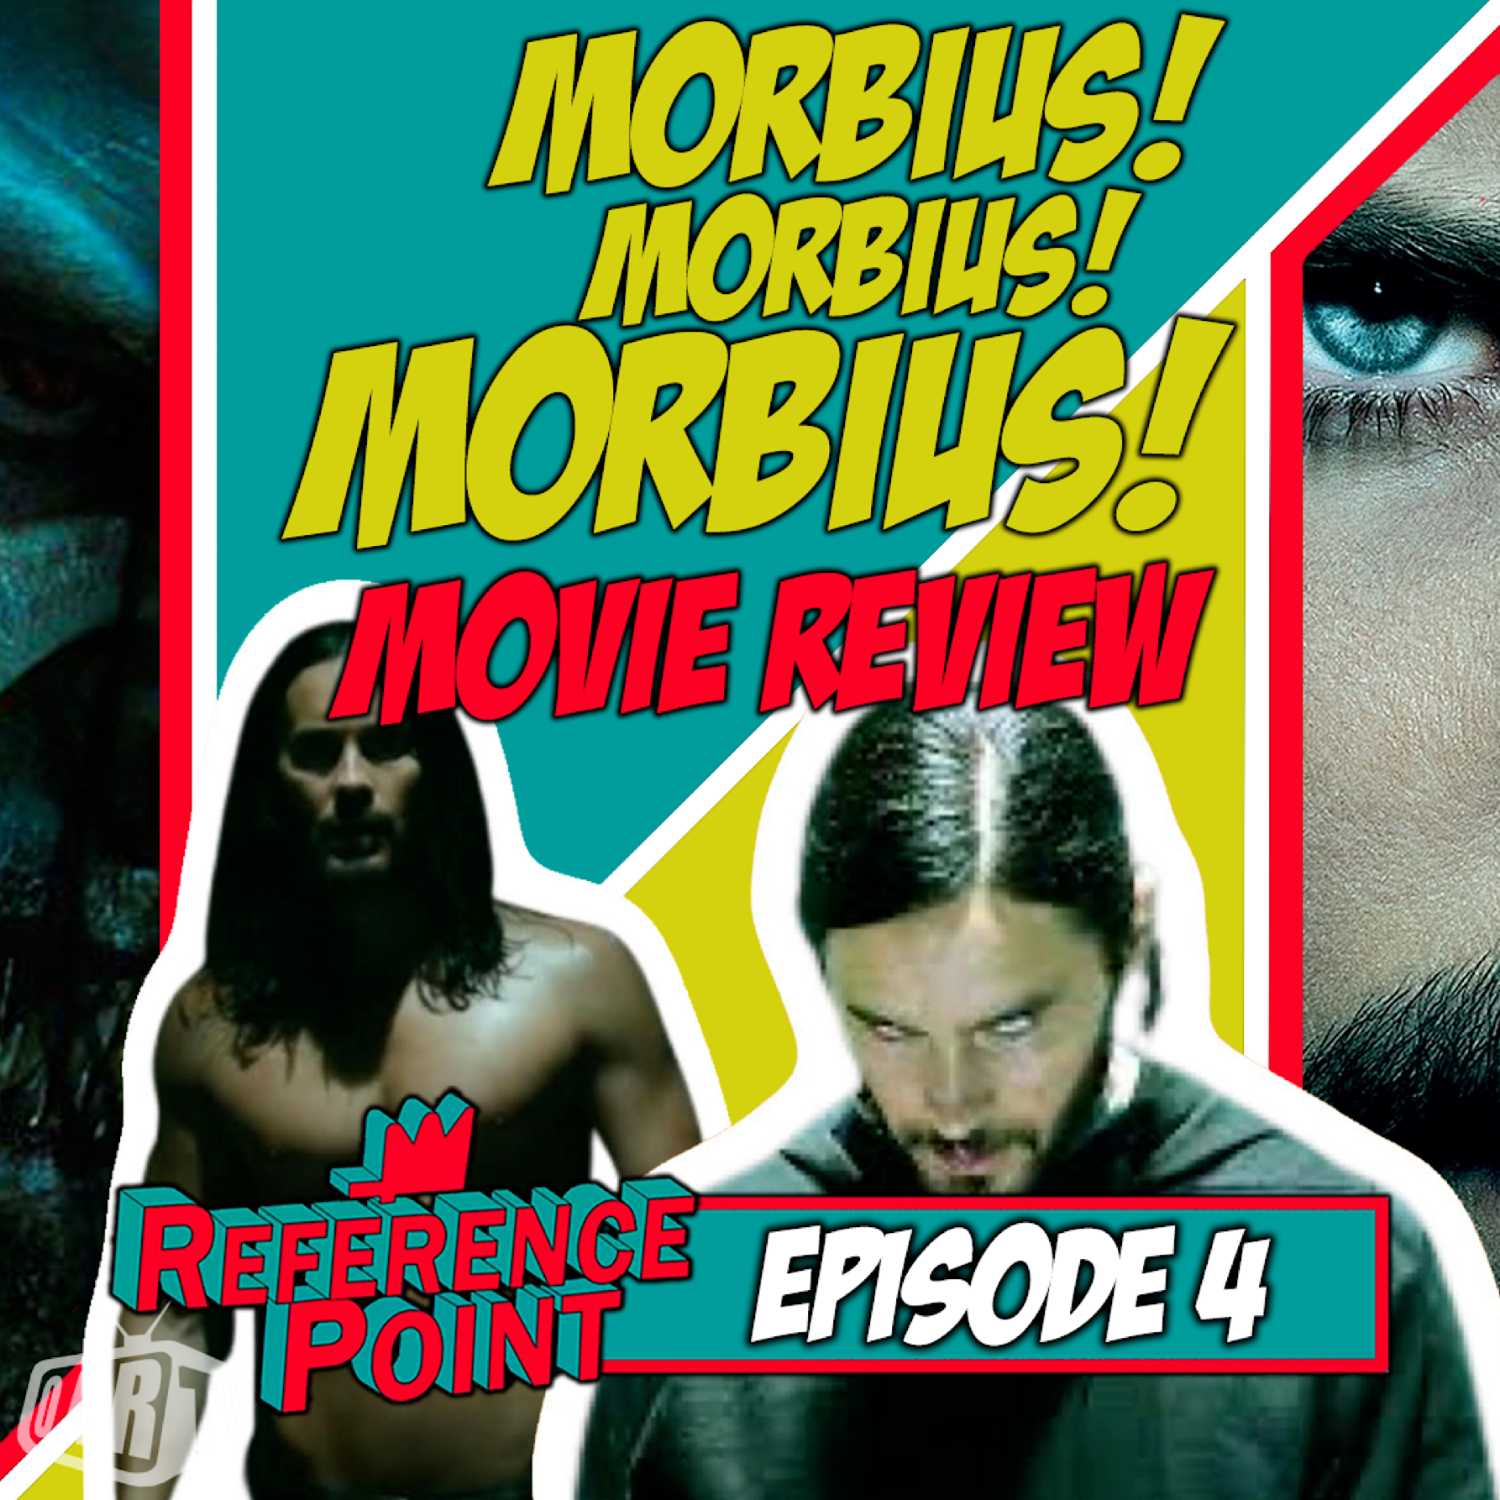 REFERENCE POINT - Episode 4 - "MORBIUS" Movie Review